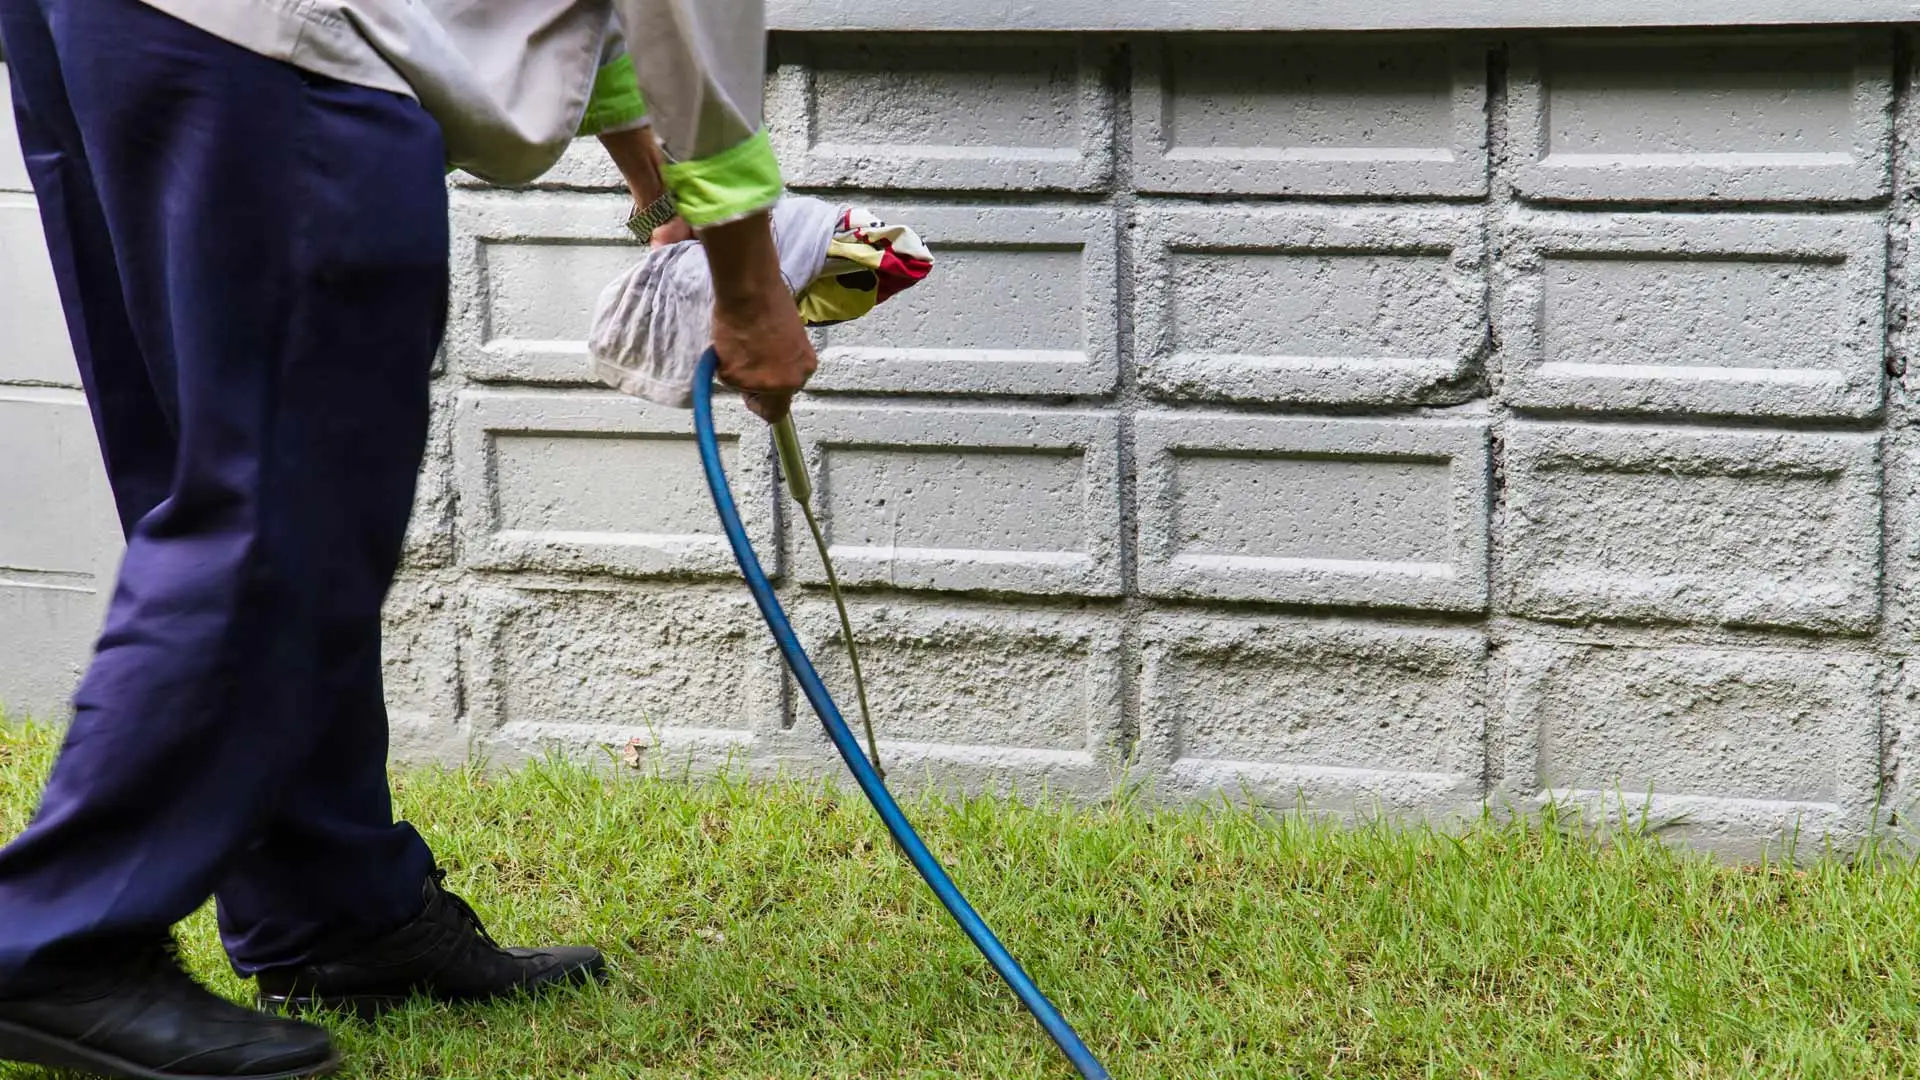 3 Things to Look for When Hiring a Perimeter Pest Control Company